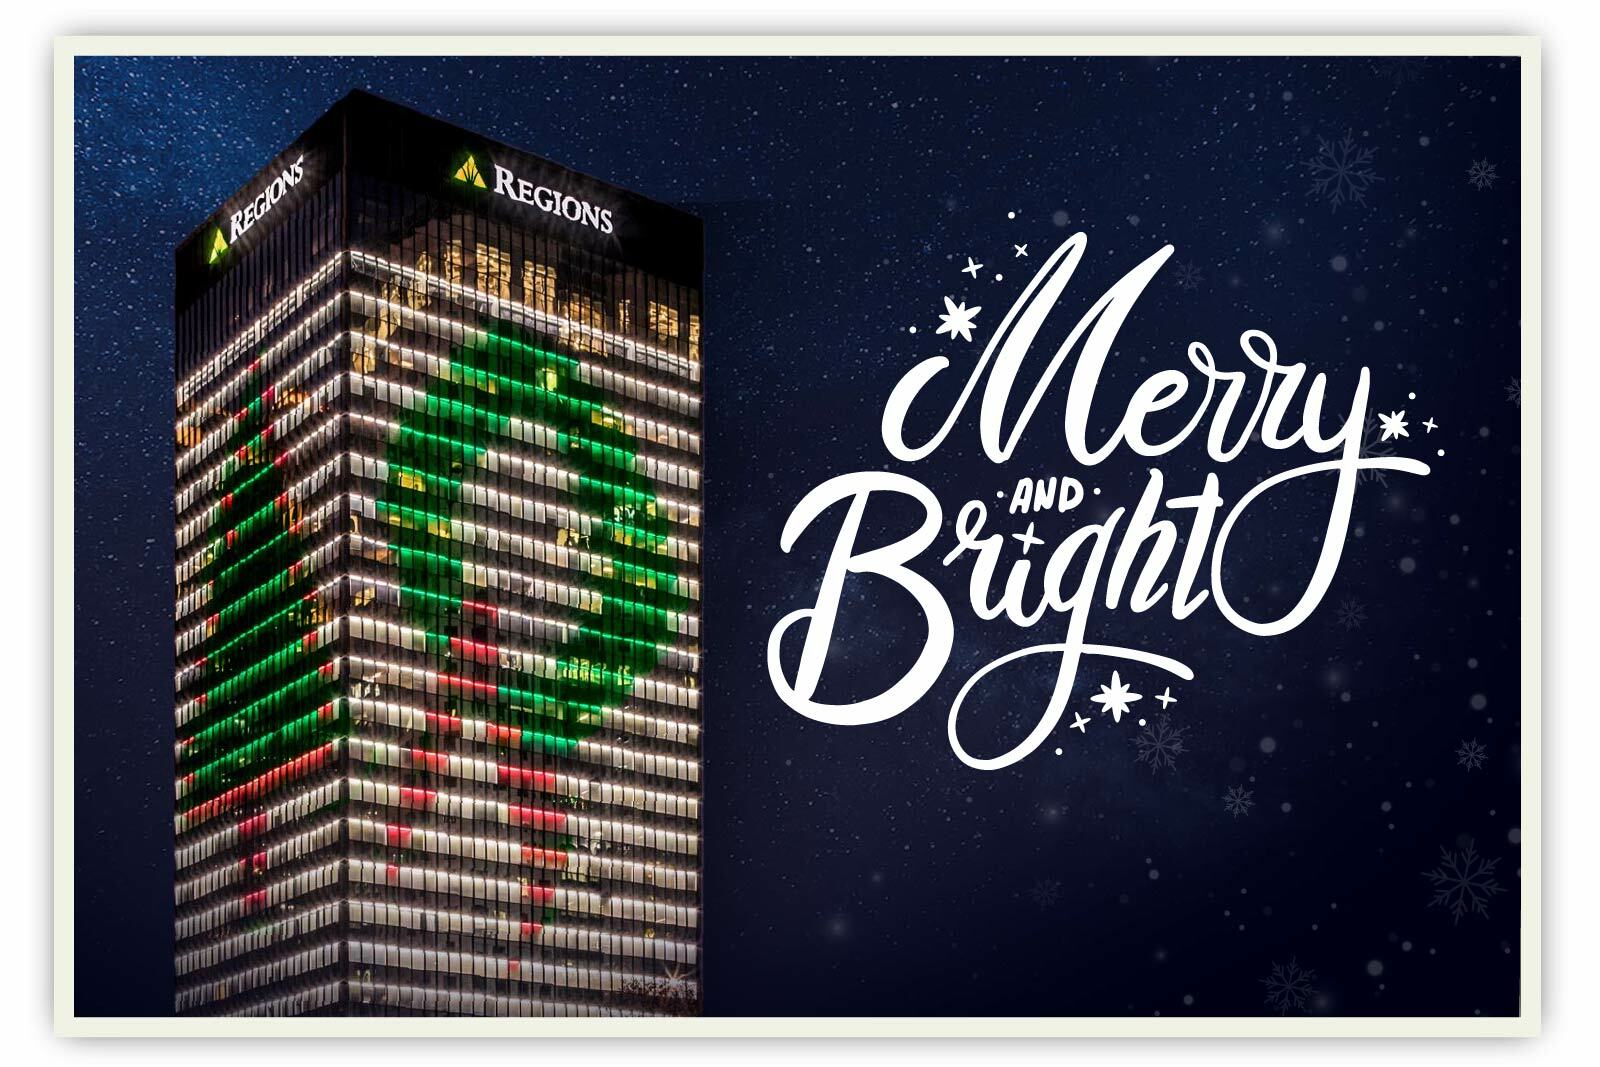 photo of Regions Center with Christmas lighting and text that...